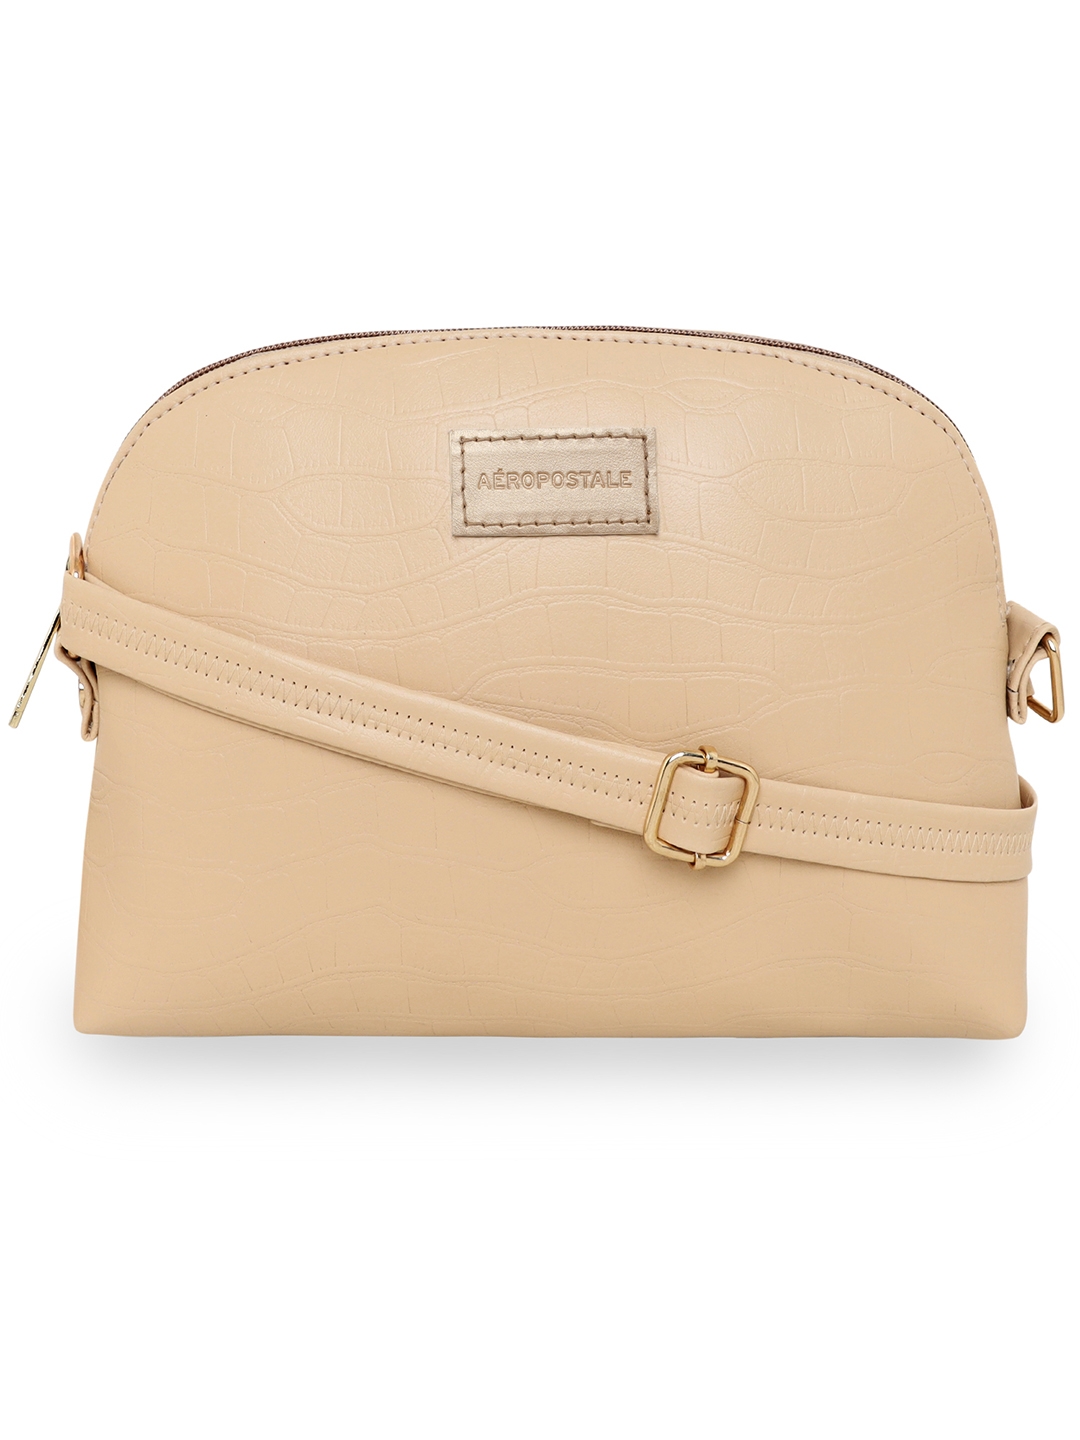 Aeropostale Textured Kylie PU Sling Bag with non-detachable strap (Cream)